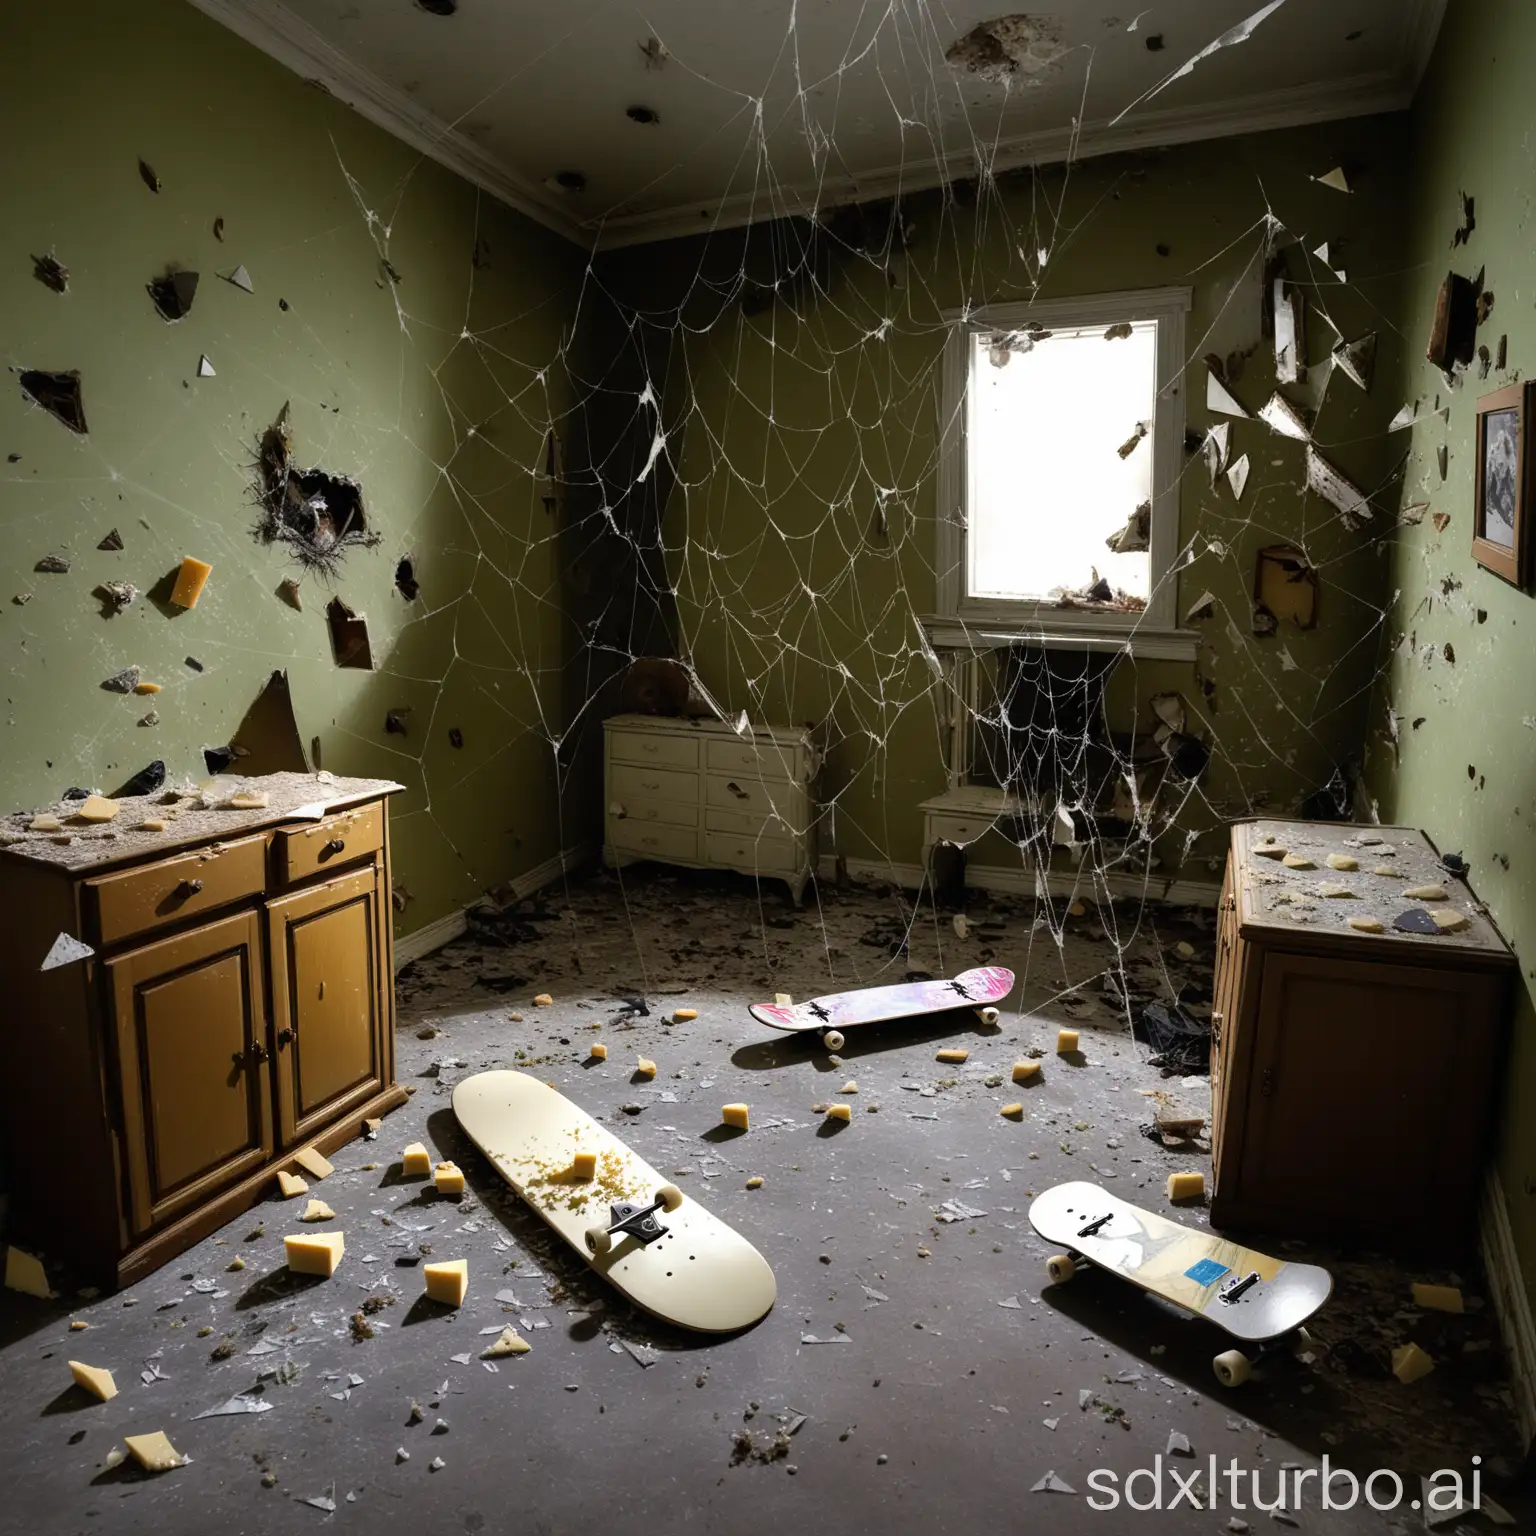 Abandoned-Room-with-Spiderwebs-Broken-Skateboard-and-Moldy-Cheese-Bread